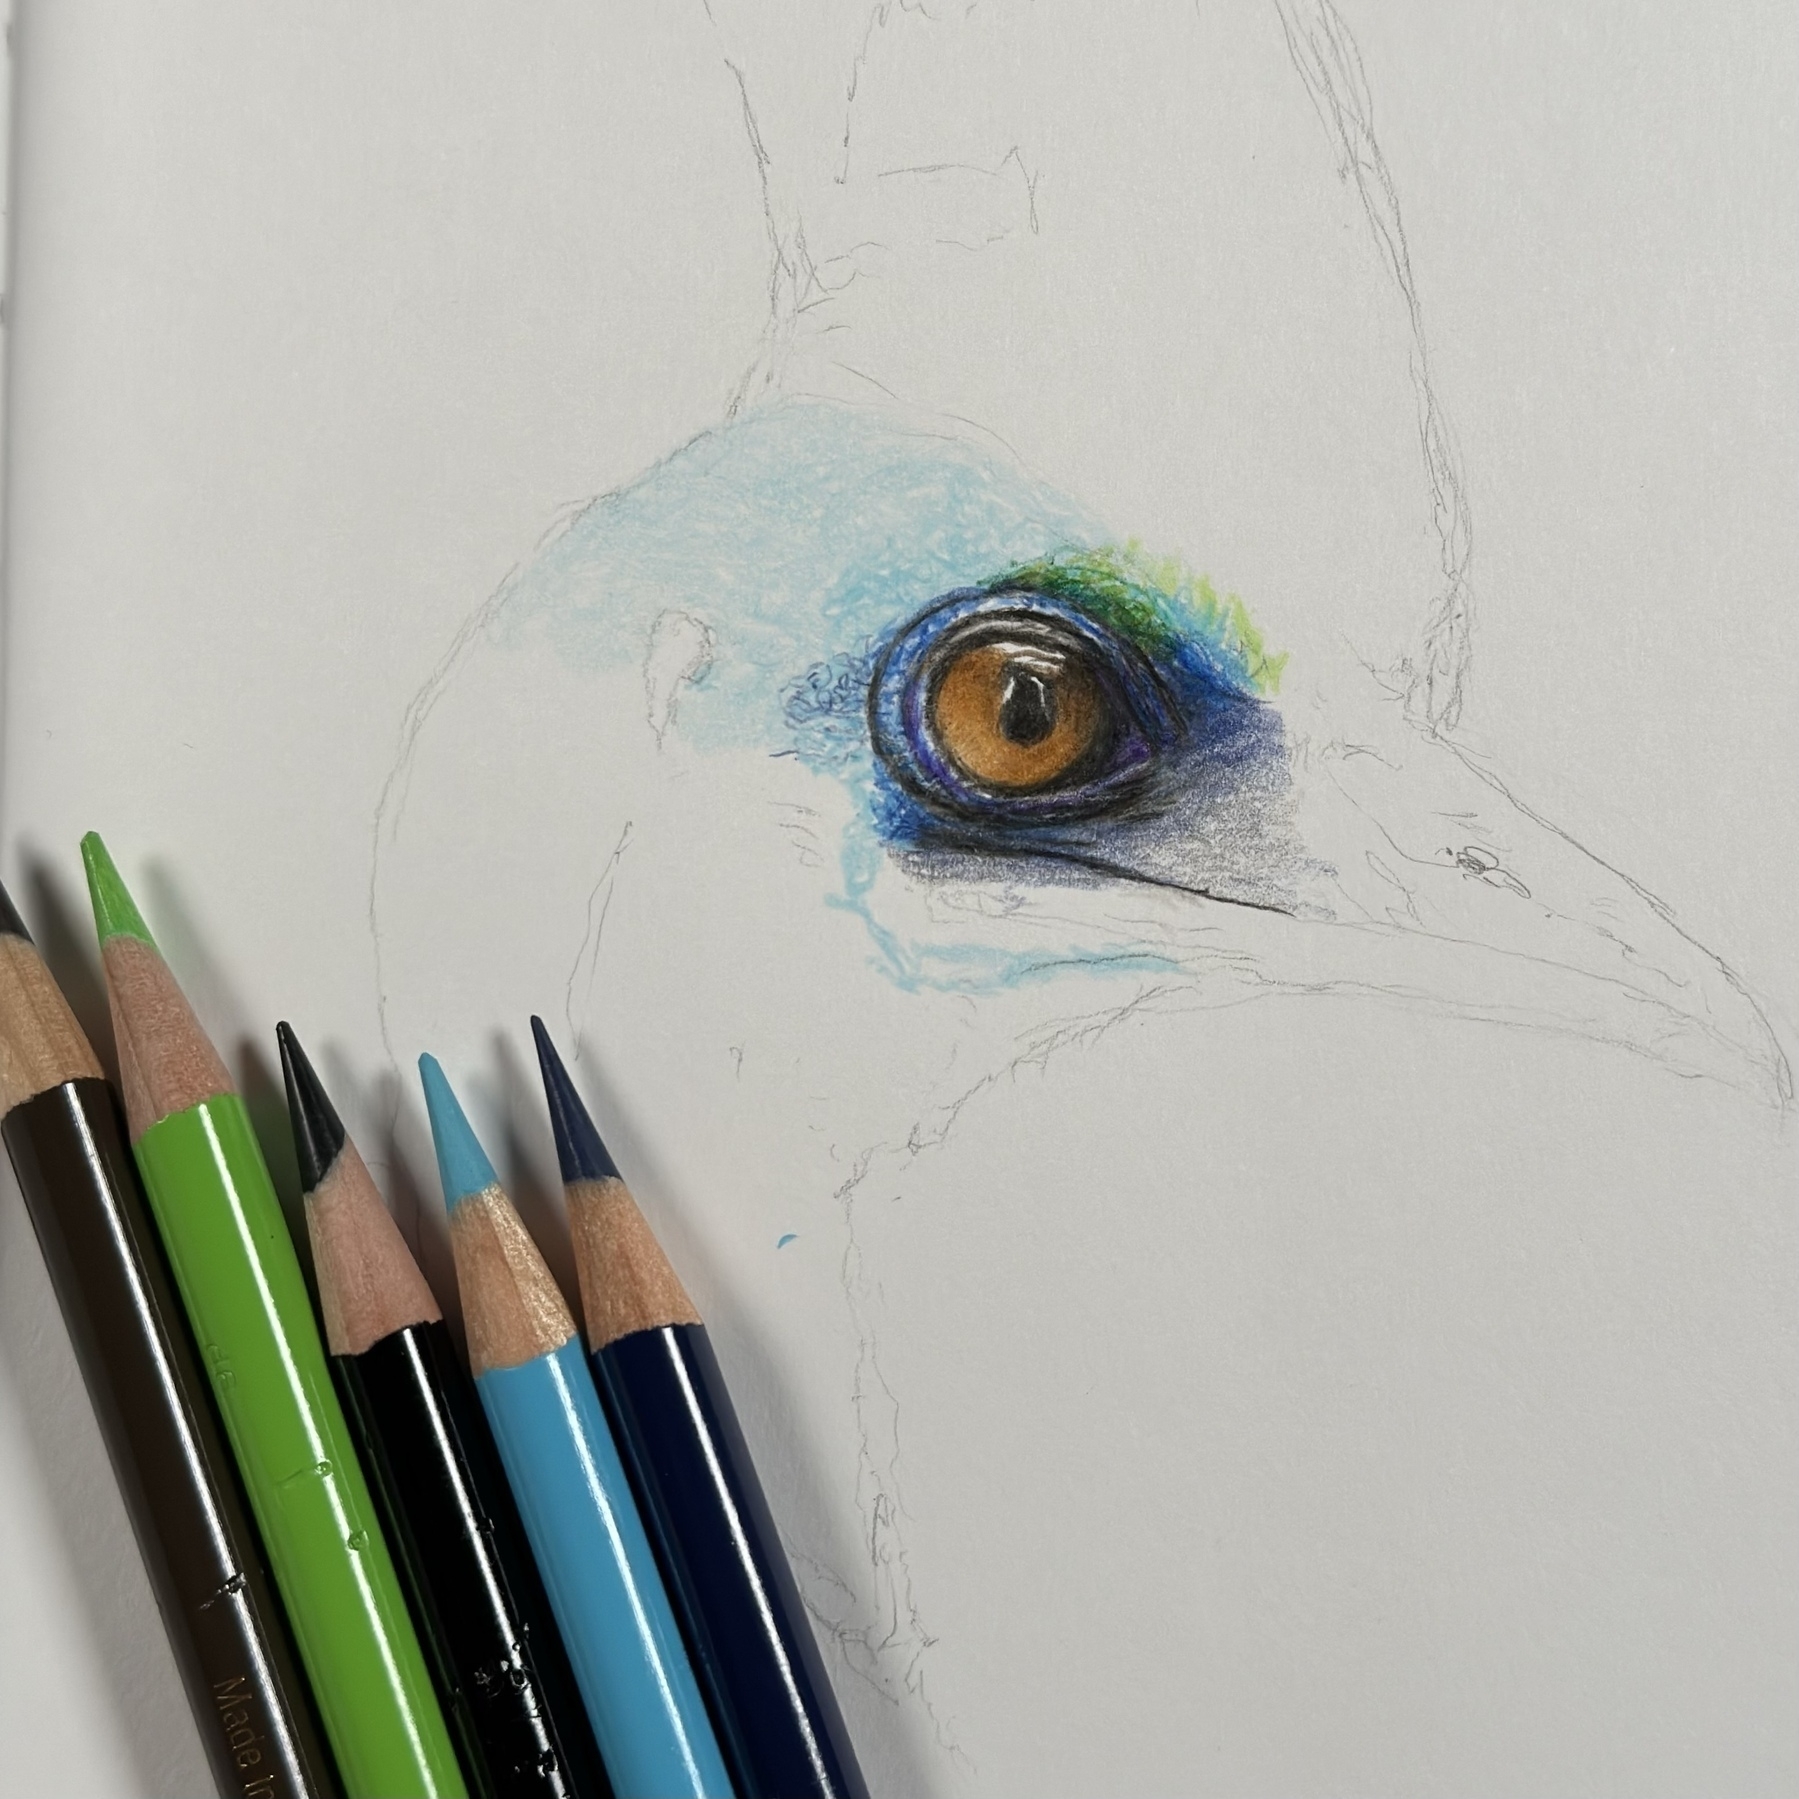 Colored pencils are placed on paper next to a detailed drawing of a bird's eye.